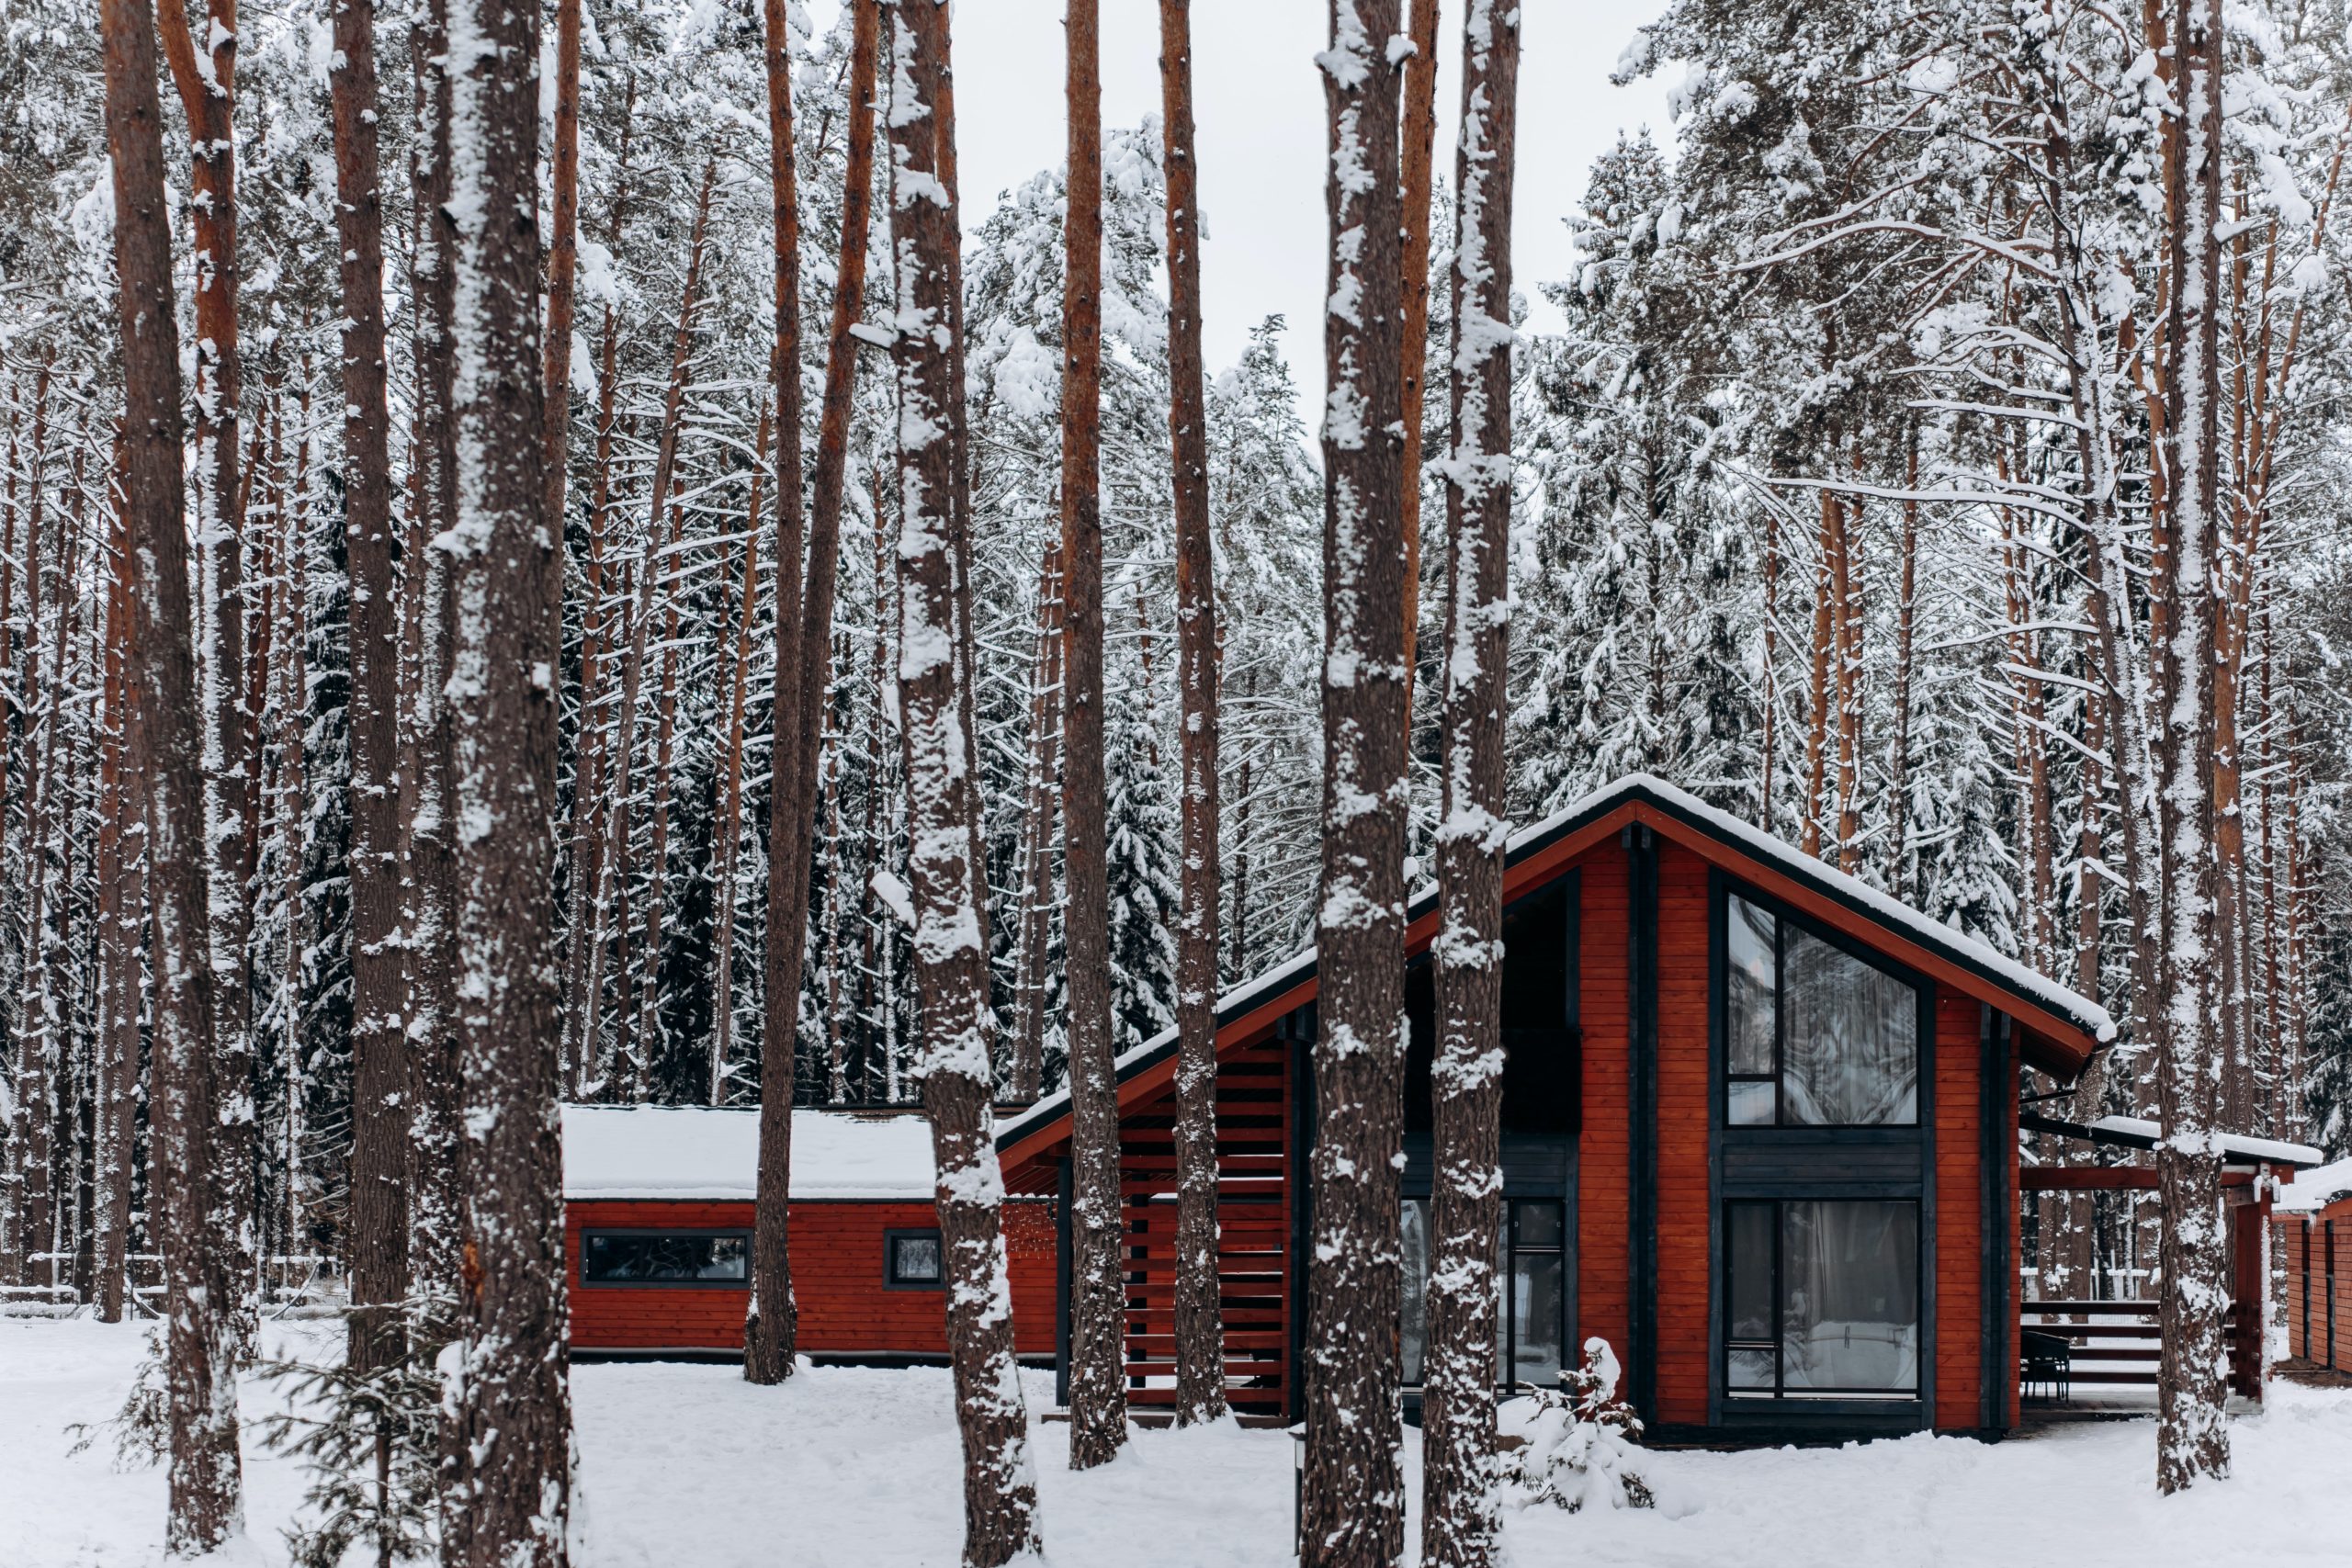 A cabin in the middle of the snow